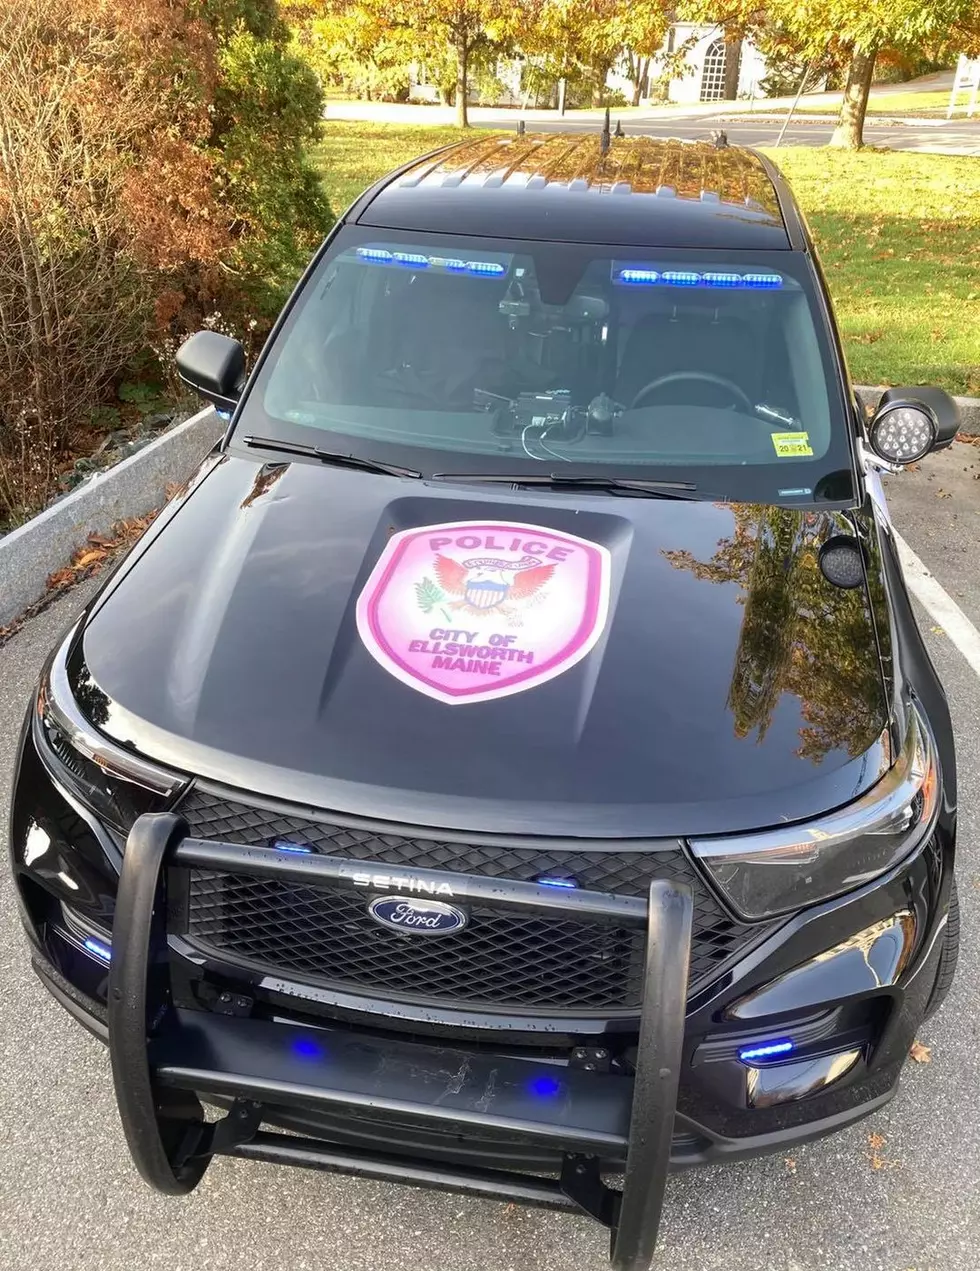 Ellsworth PD Add Breast Cancer Awareness Decals to Cruisers for October